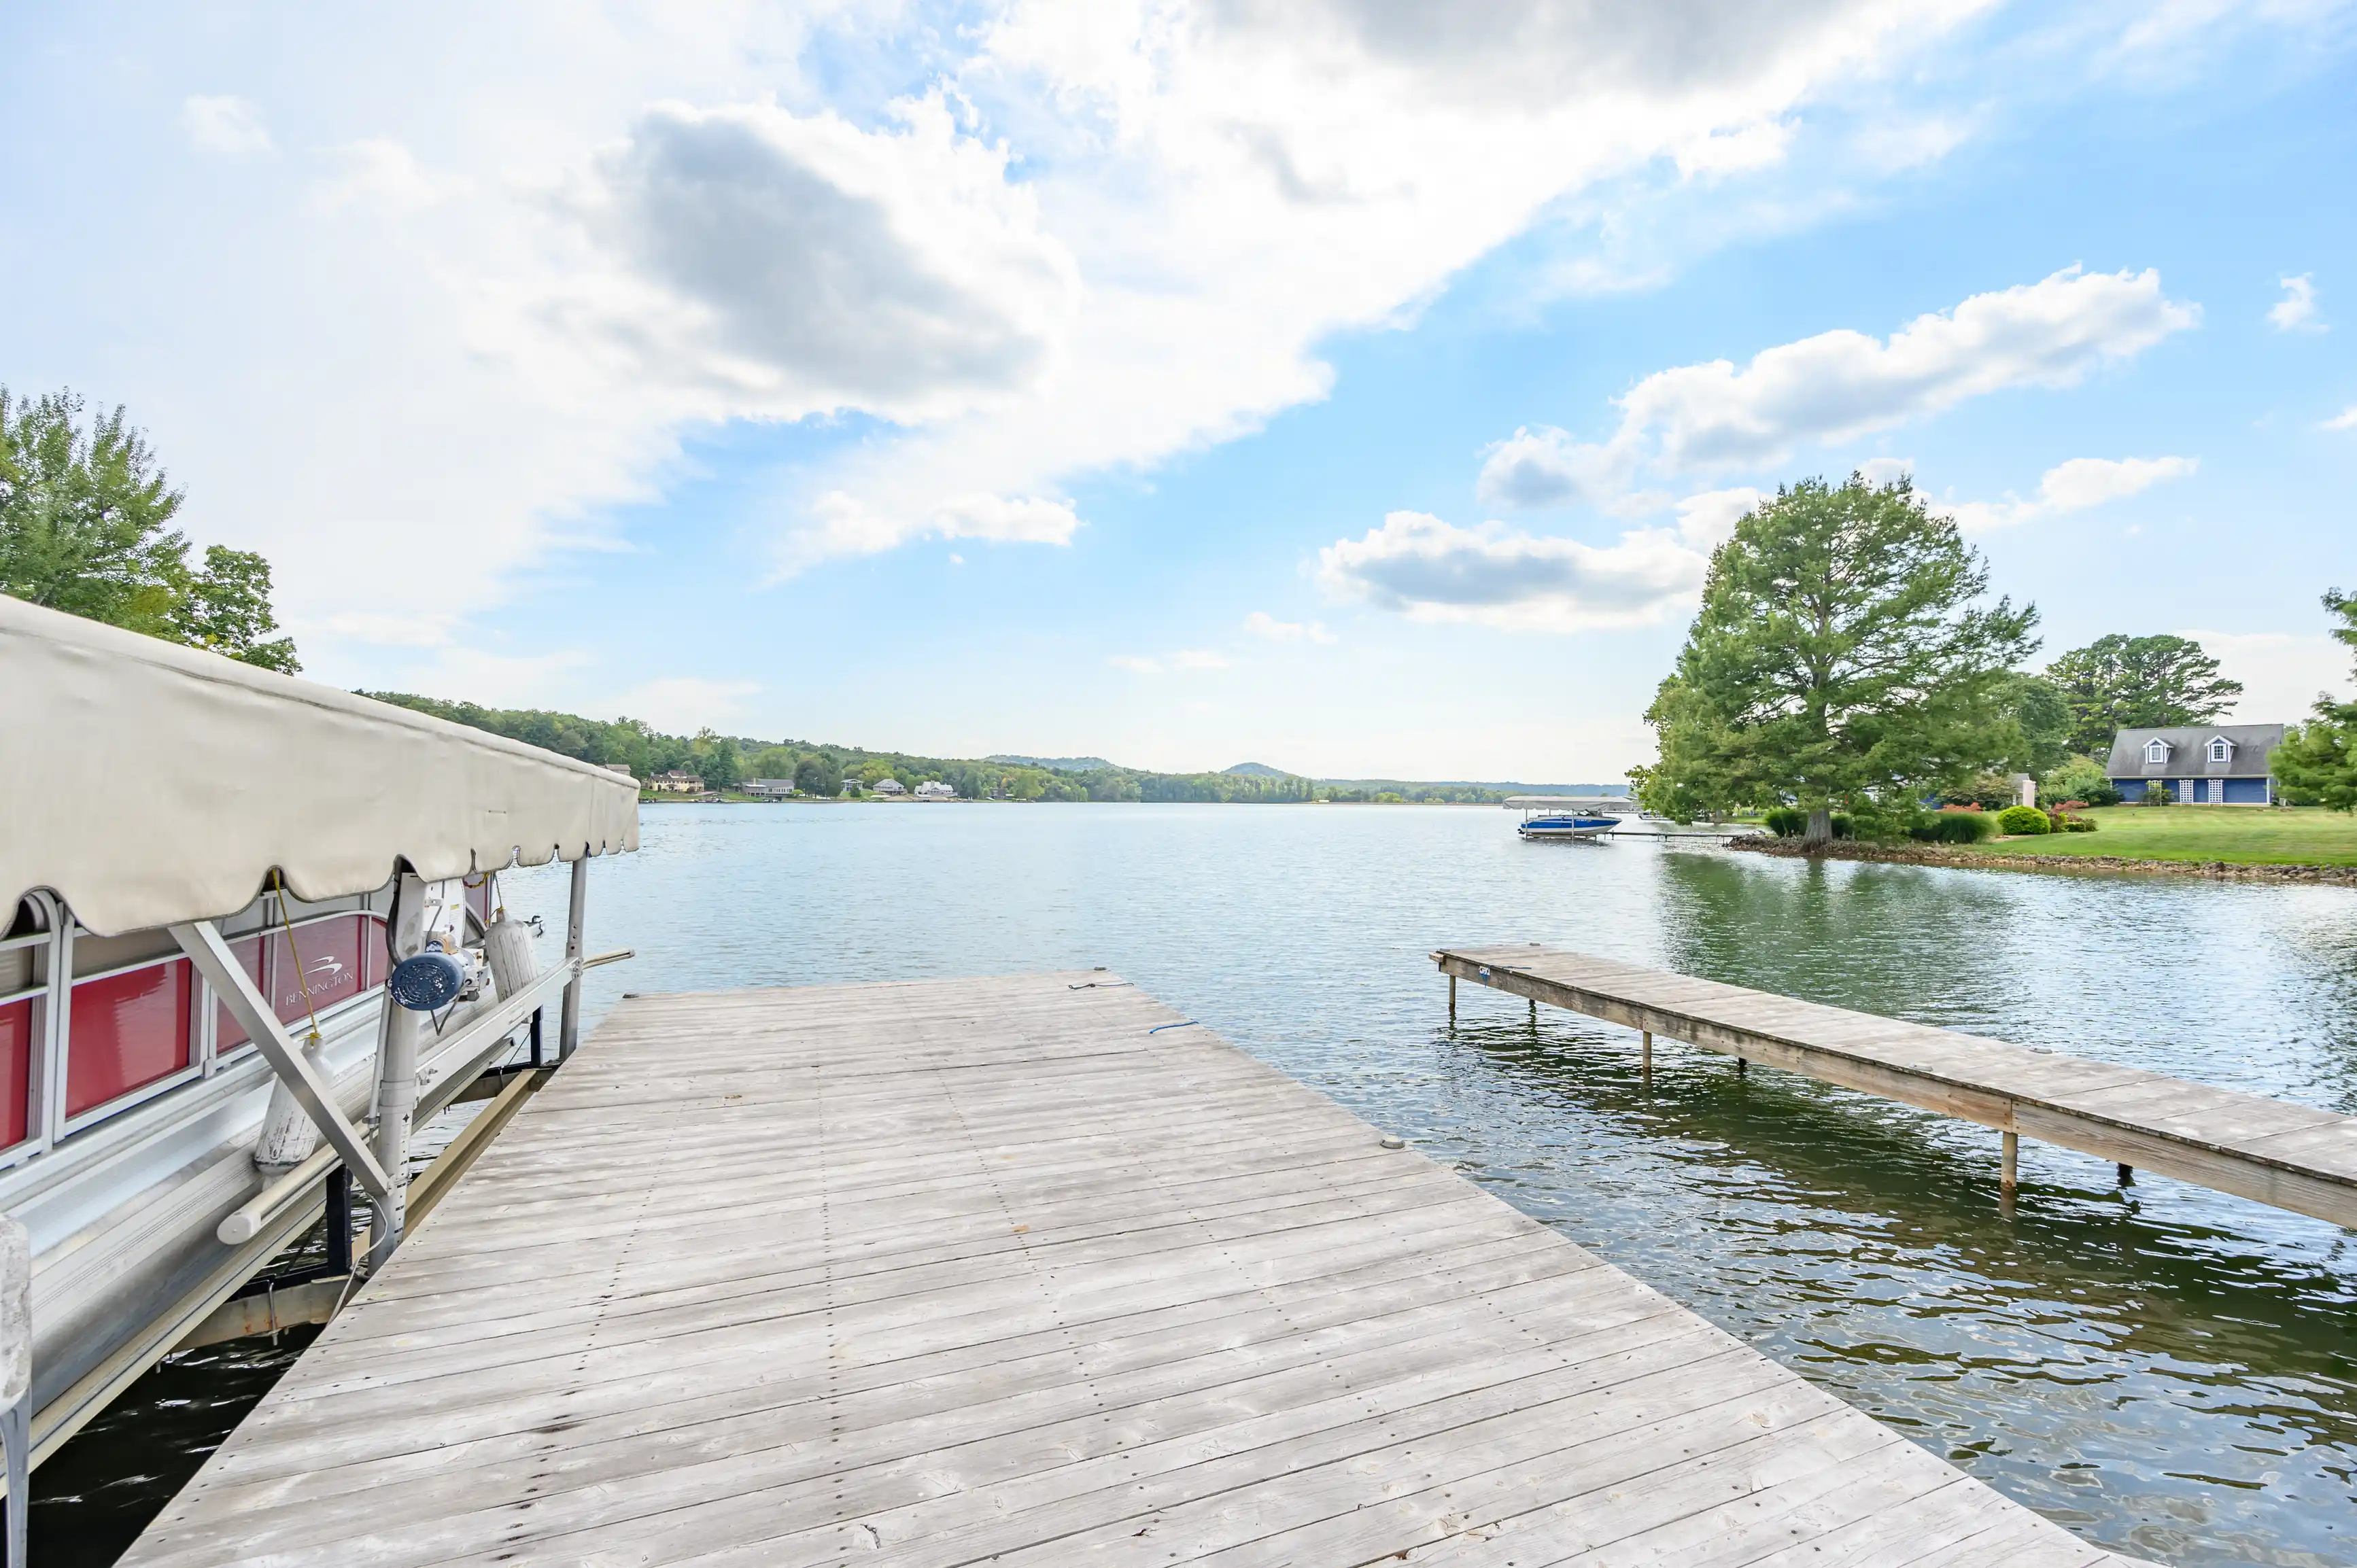 A serene lakeside view with a wooden dock extending into the water, a covered pontoon boat on the left, and a landscape with houses and trees in the background under a blue sky with clouds.